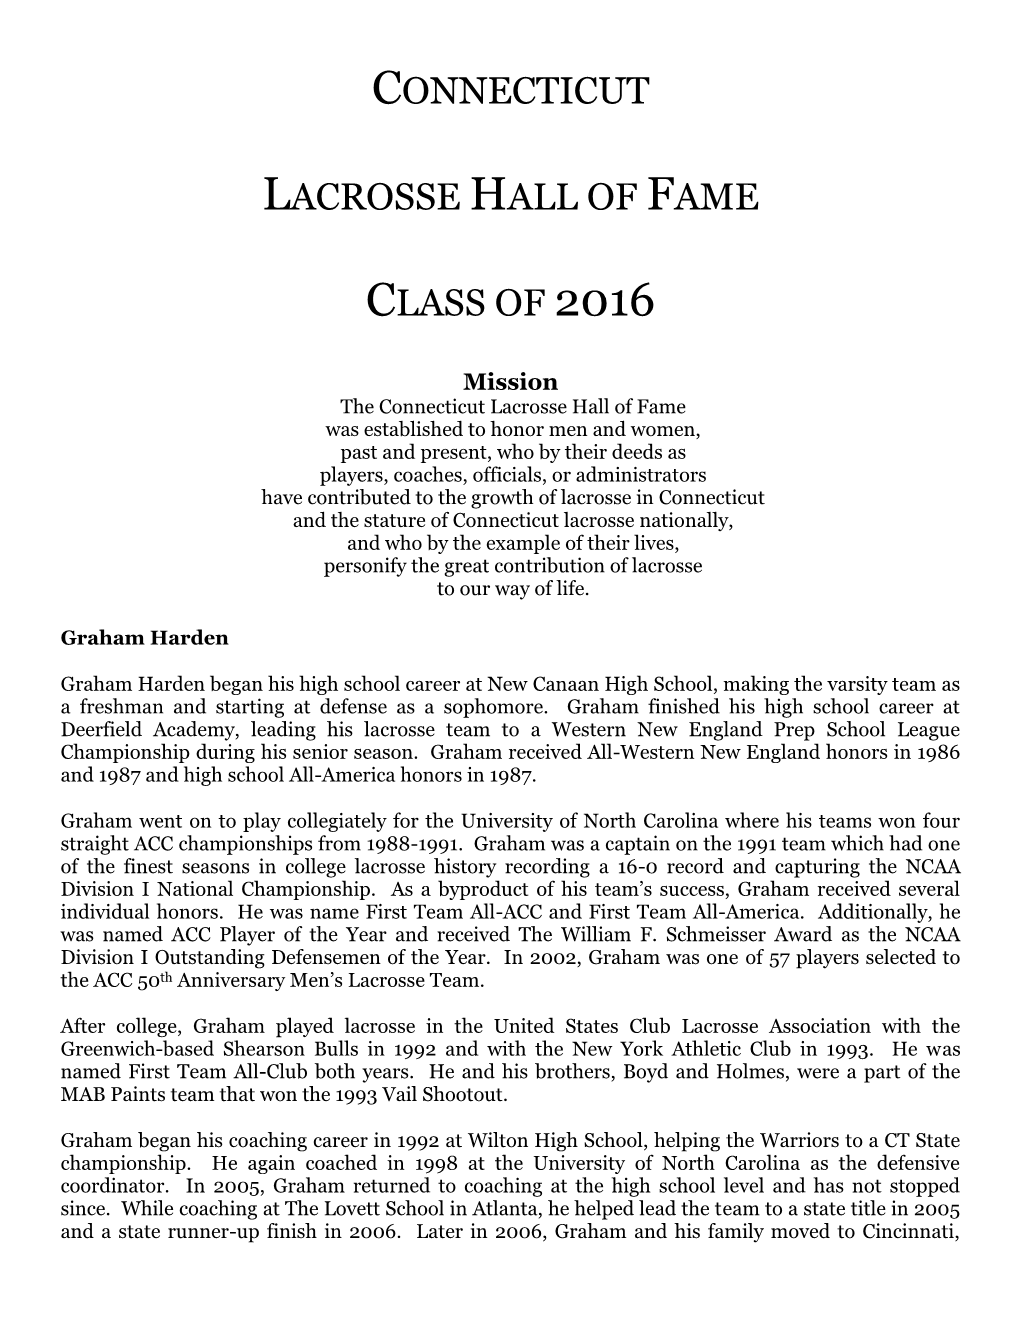 Connecticut Lacrosse Hall of Fame Class of 2016